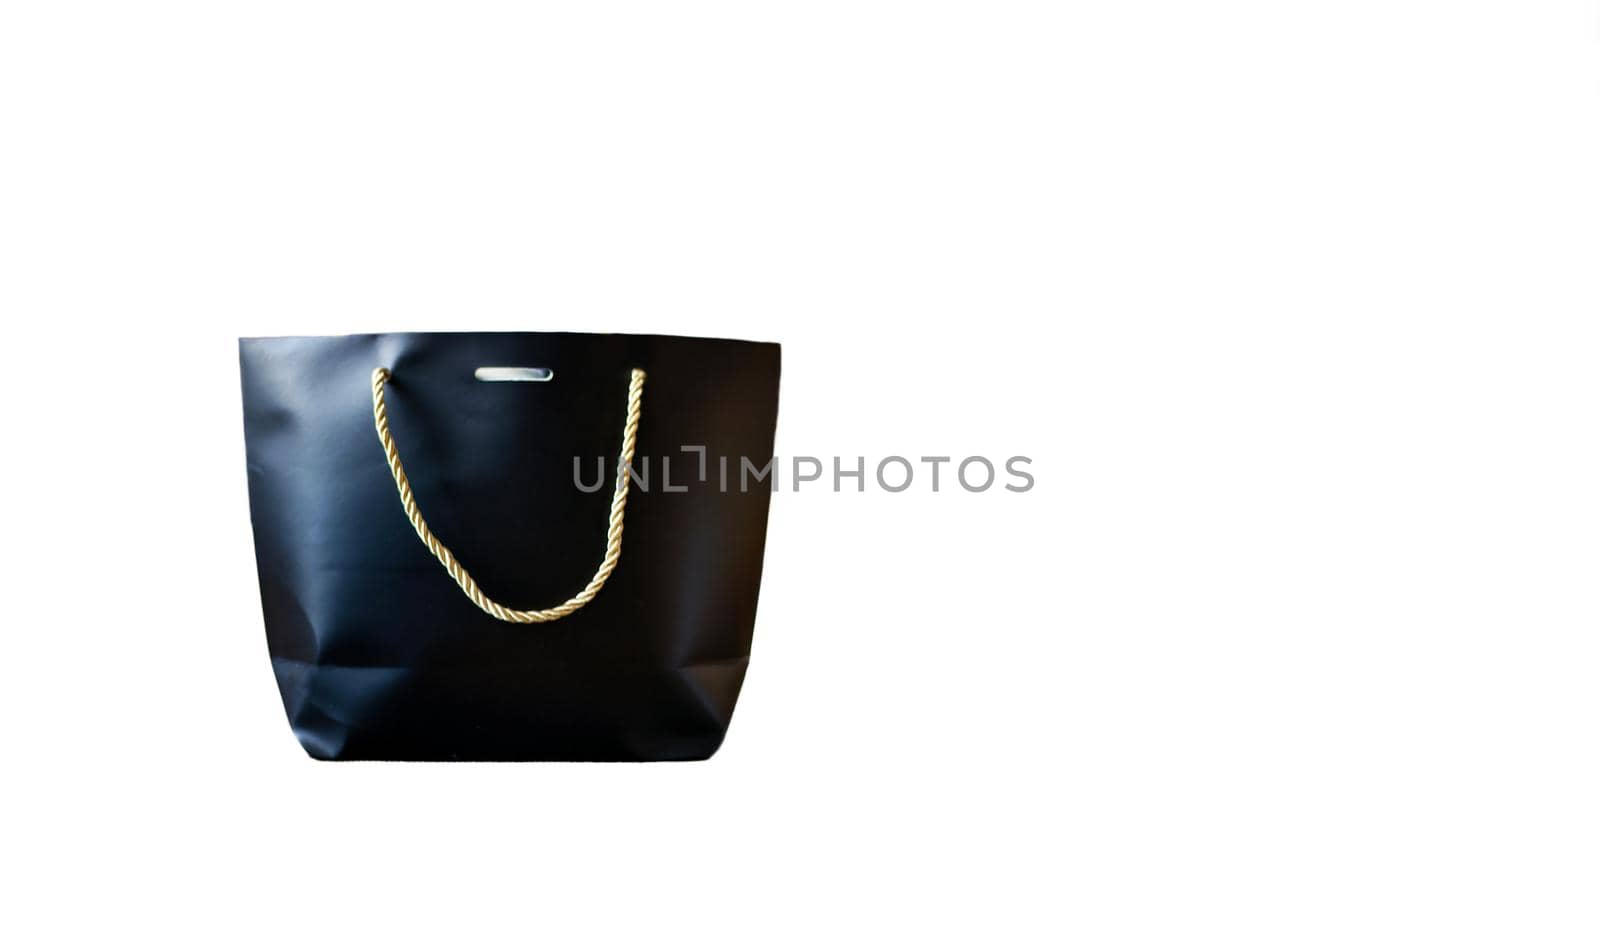 black women carry bag with string on side without any brand isolated on white background for copy paste text